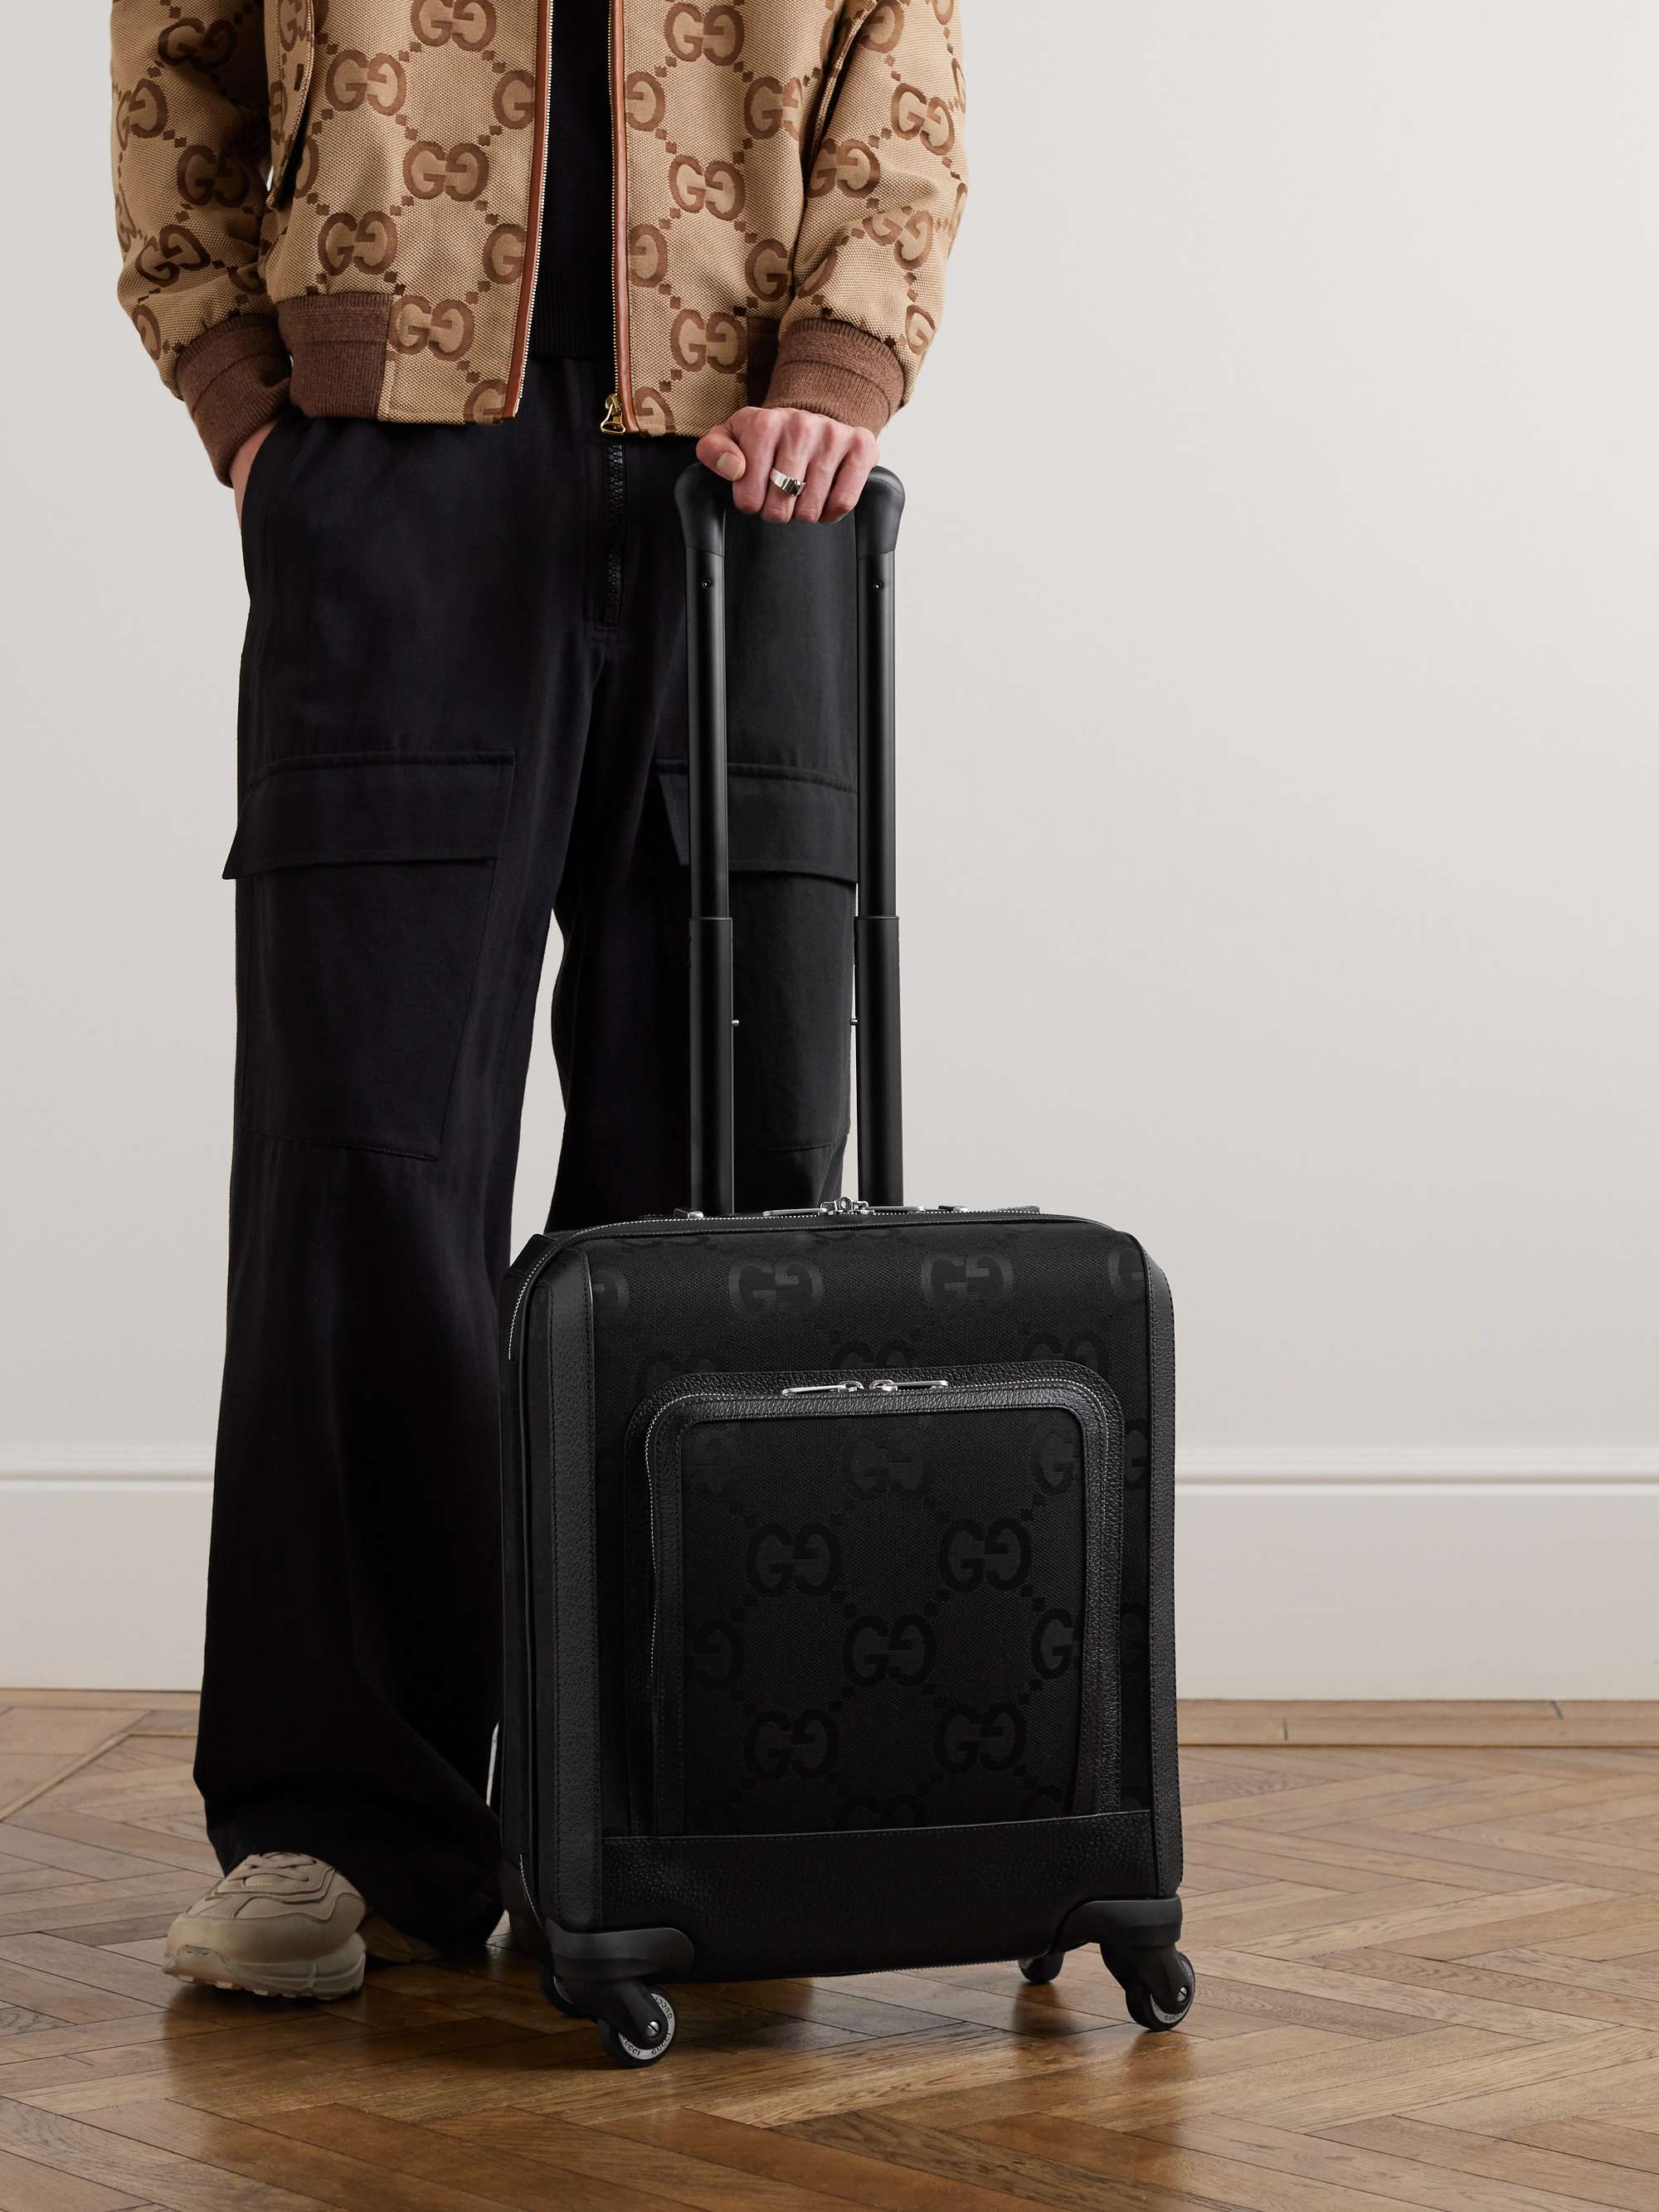 GUCCI Leather-Trimmed Monogrammed Canvas Carry-On Suitcase | MR PORTER